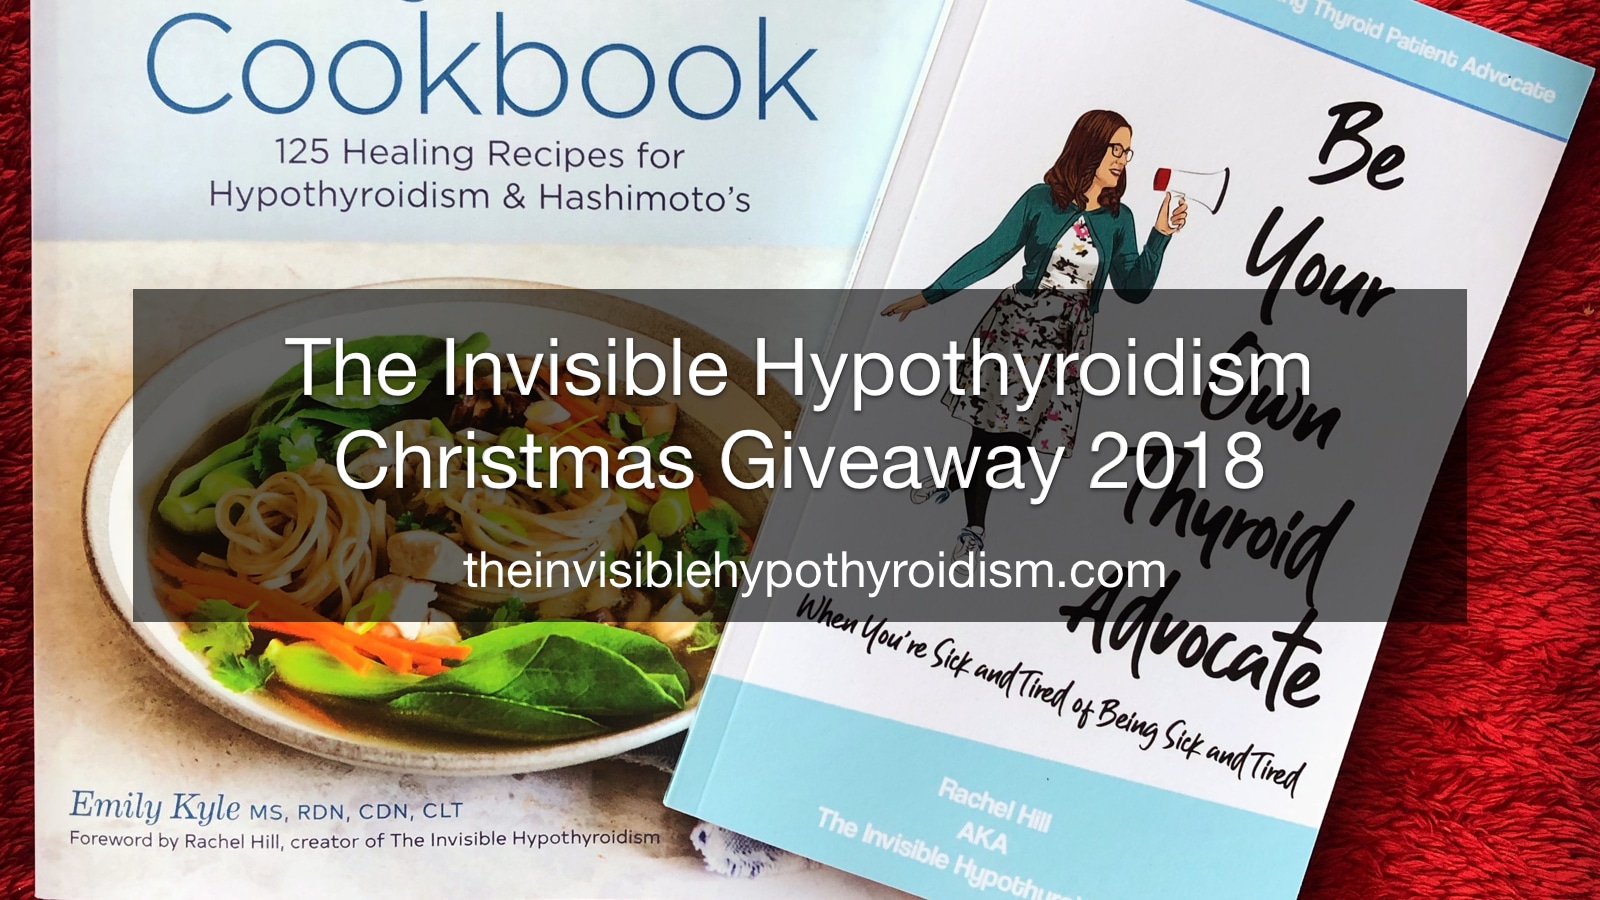 The Invisible Hypothyroidism Christmas Giveaway 2018